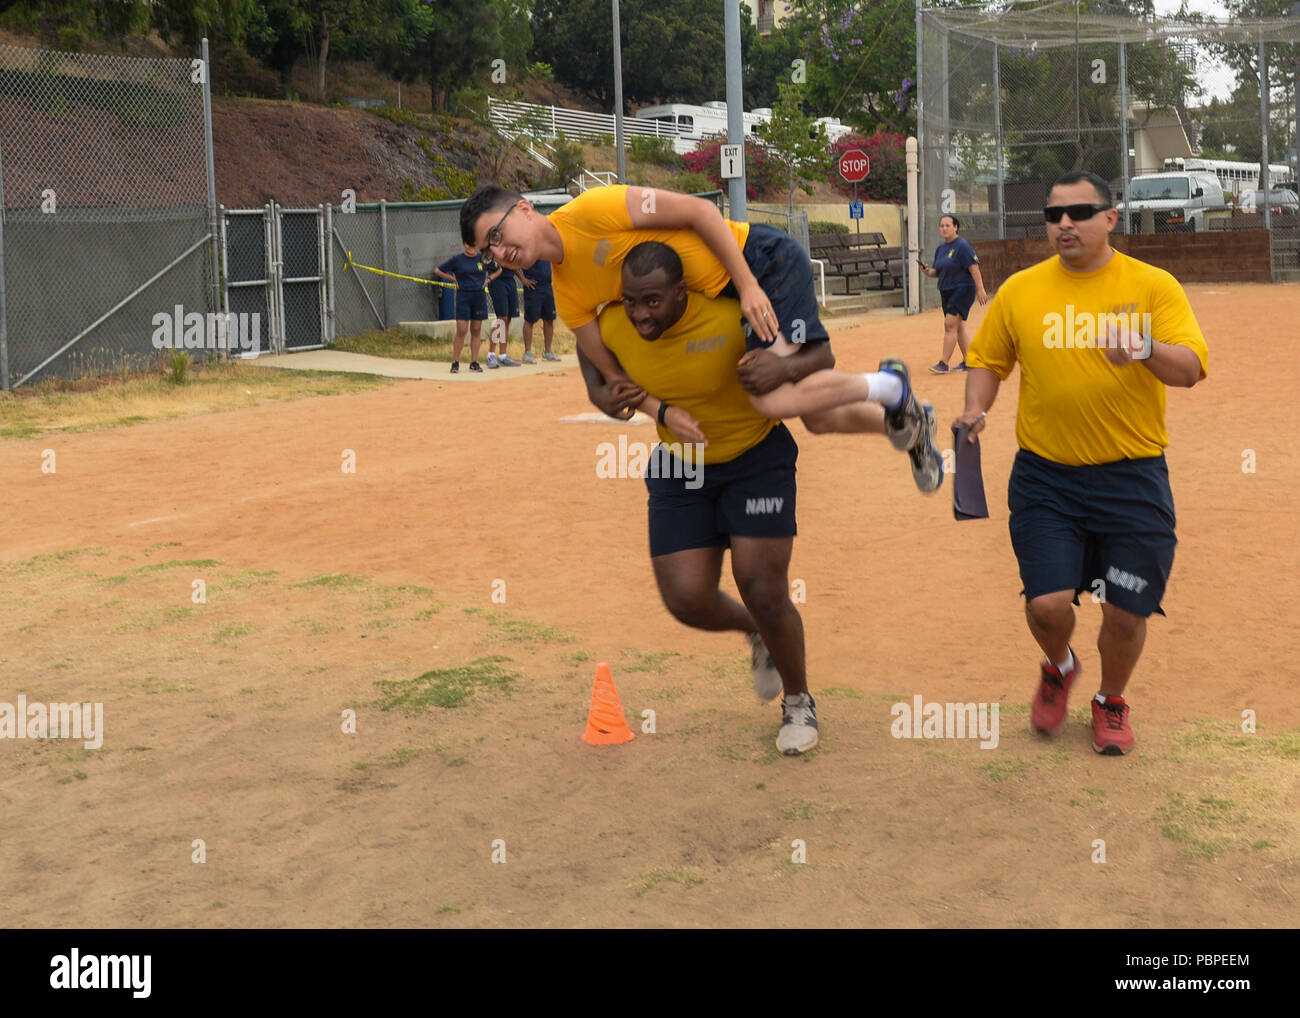 180720-N-PN275-1126 SAN DIEGO (July 20, 2018) Hospital Corpsman 2nd Class Trevor Tisby, carries Hospital Corpsman Seaman Apprentice Ryan Laburada for an obstacle course in Naval Medical Center San Diego’s Sailor Games to observe the launch of Sailor 360. Sailor 360 is the Navy’s new leadership training curriculum, which is designed to provide meaningful training to Sailors of all ranks. (U.S. Navy Photo by Mass Communication Specialist 2nd Class Zach Kreitzer) Stock Photo